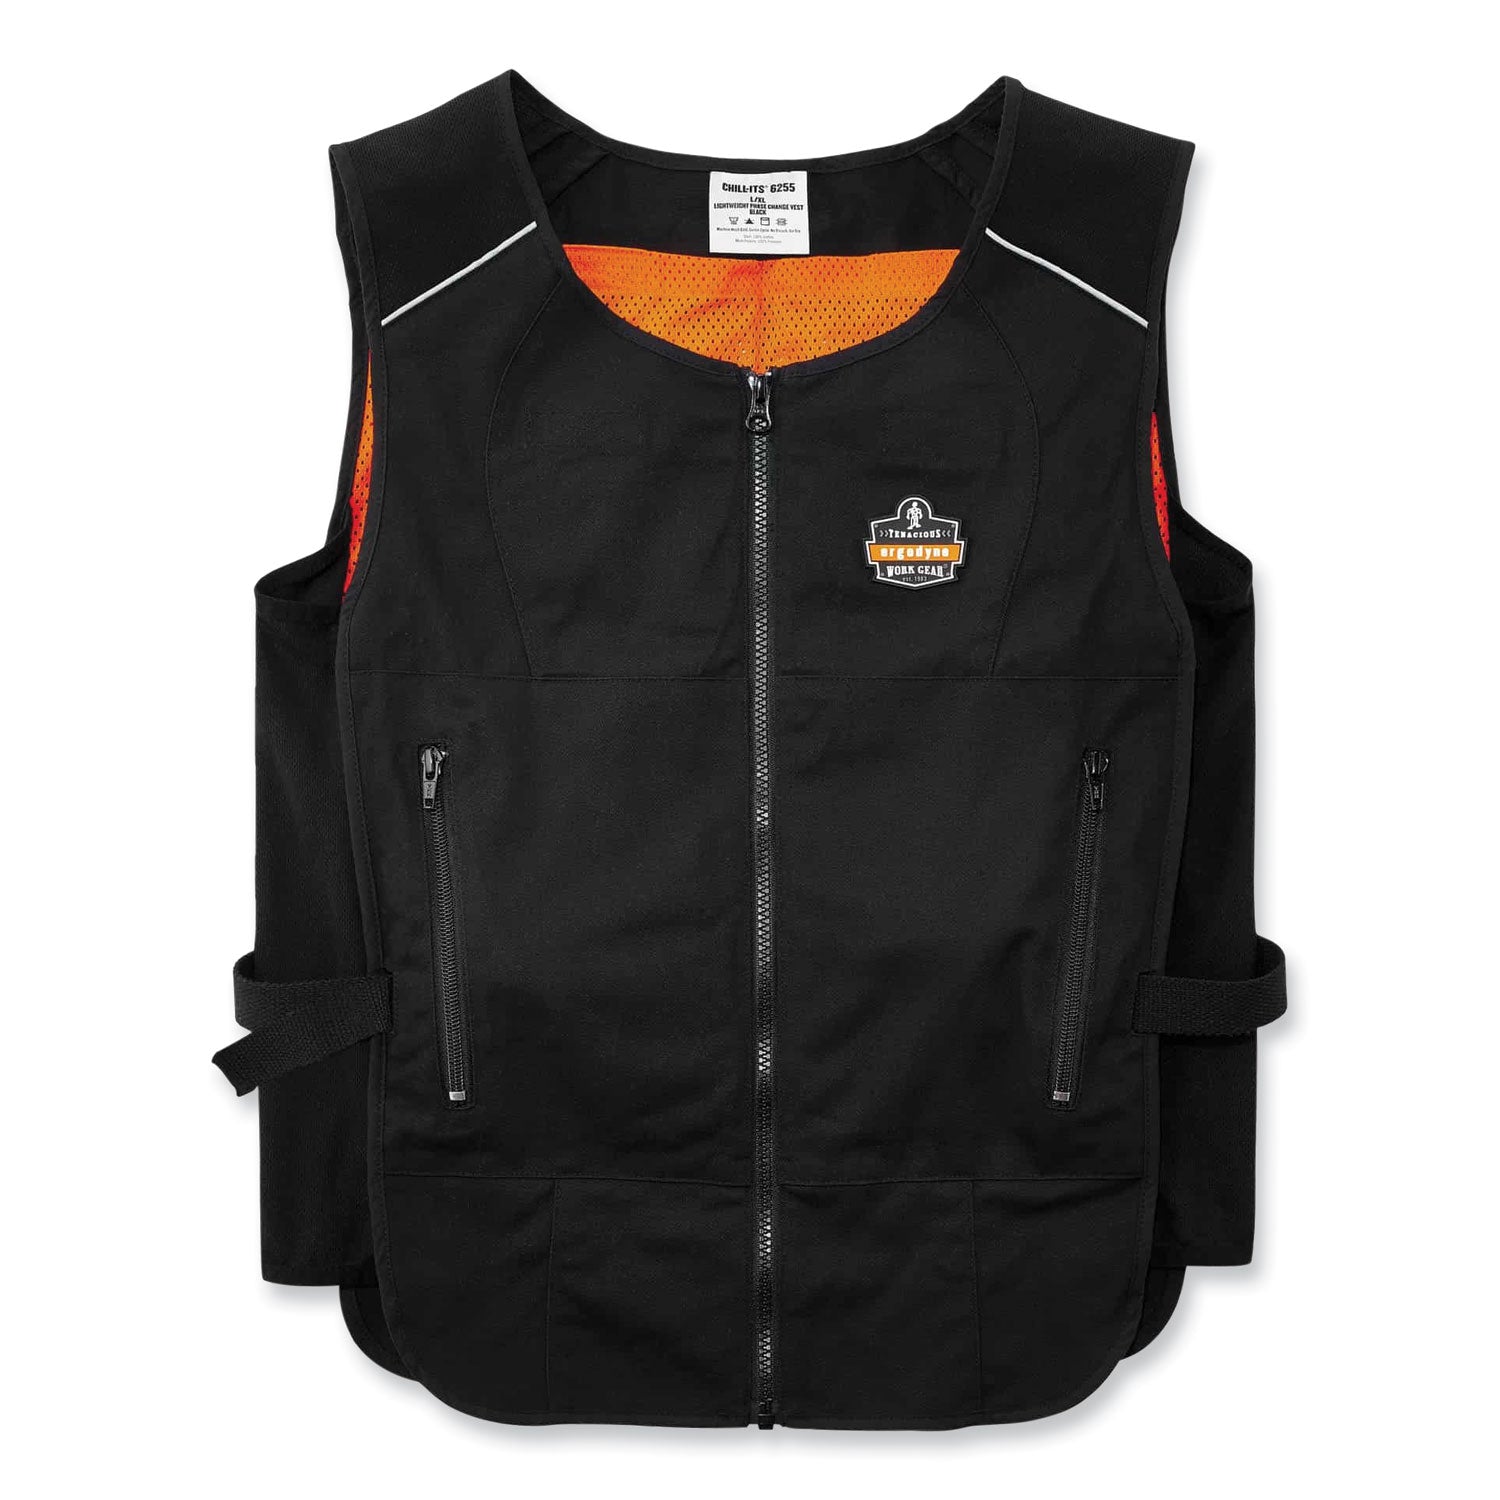 chill-its-6260-lightweight-phase-change-cooling-vest-w-packs-cotton-polyester-small-med-black-ships-in-1-3-business-days_ego12133 - 1